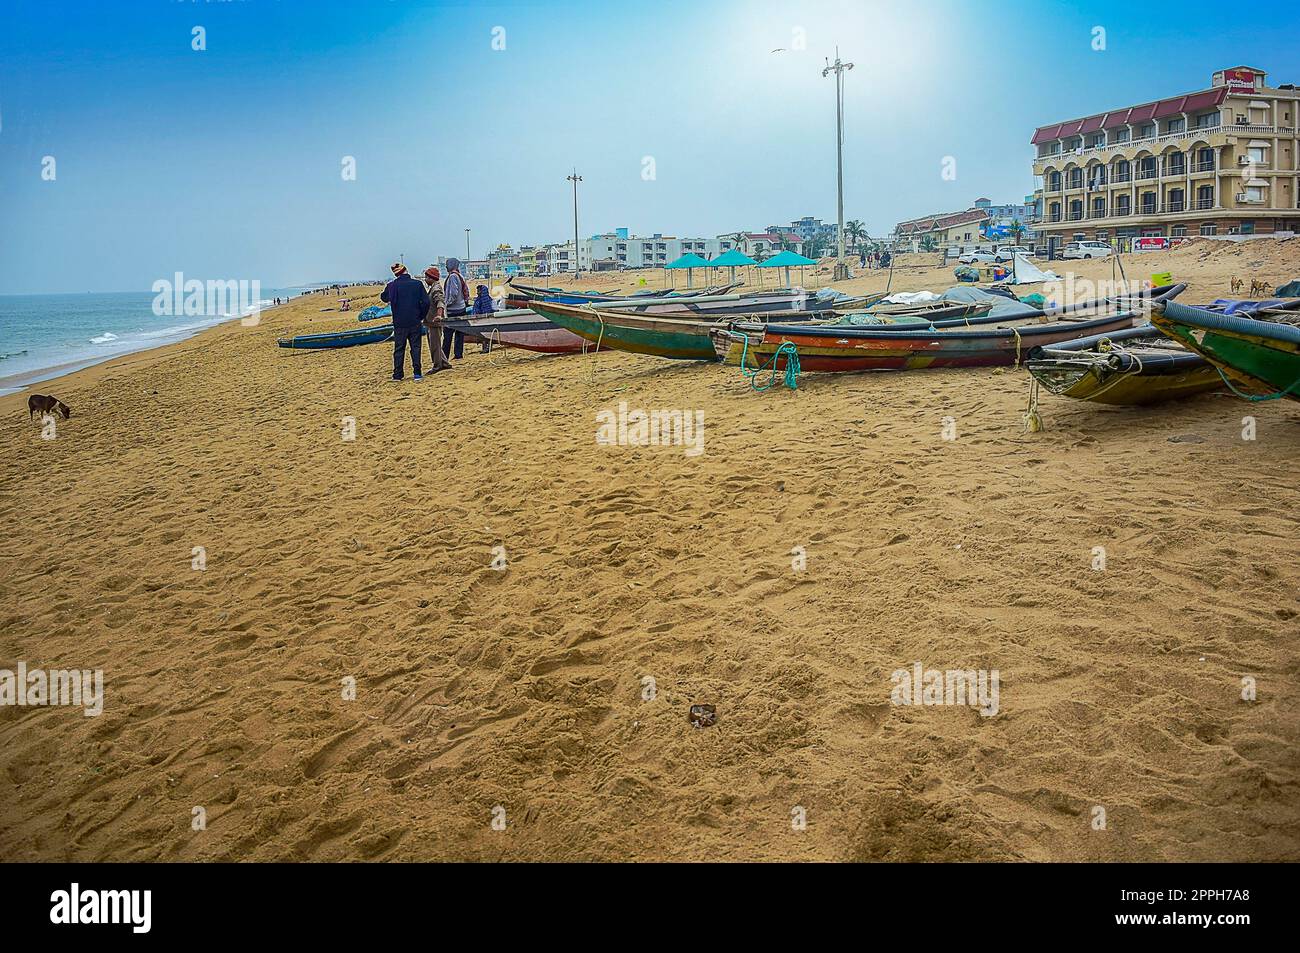 Seashore and Beaches around of India Travelling and tour ot PURI an age old renound city, beach resort in the beach of bay of Bengal, Odisa, India, very popular in eastern India. FEBRUARY 2020. Stock Photo